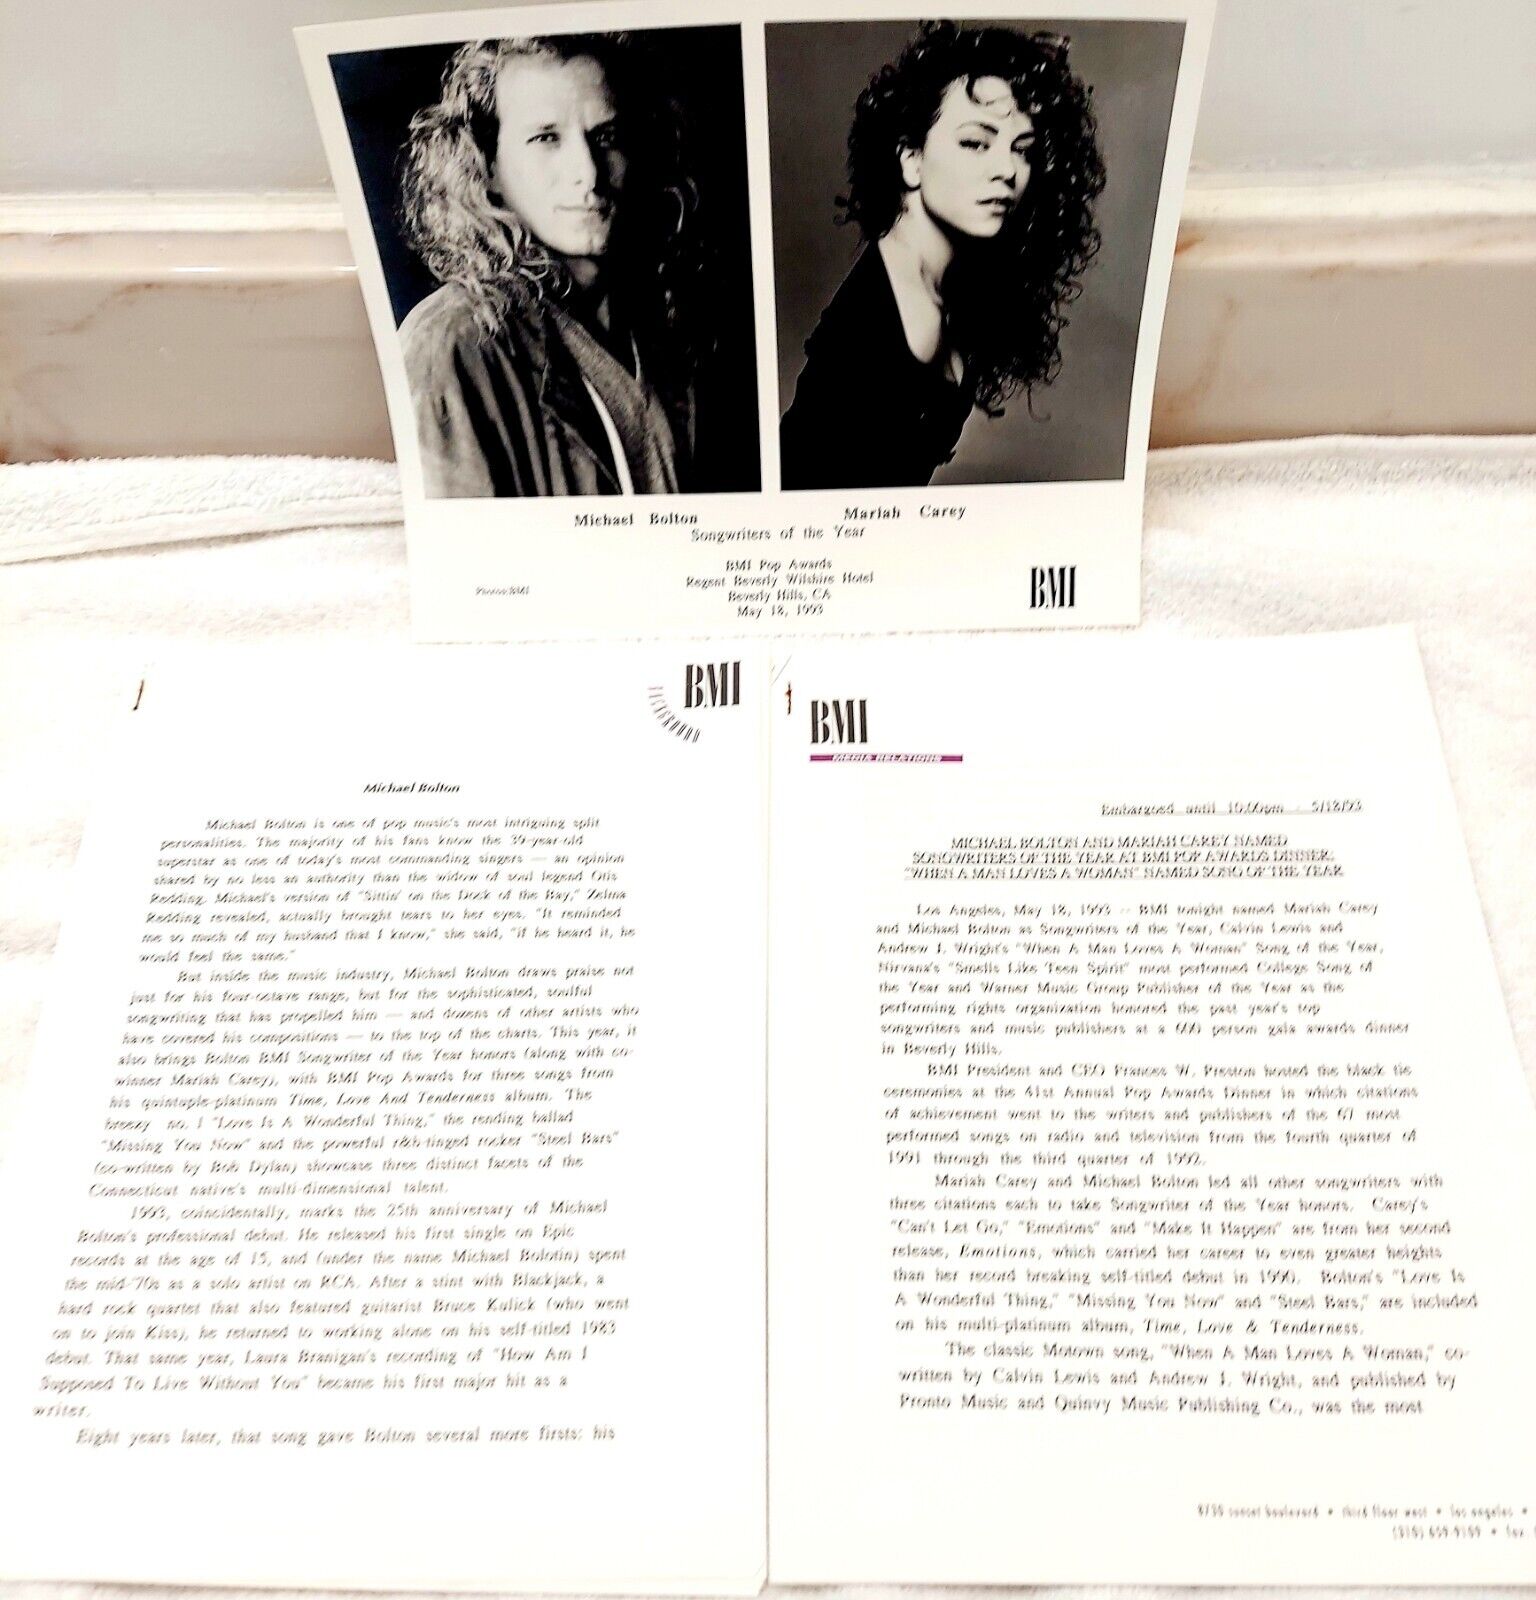 MICHAEL BOLTON & MARIAH CAREY BMI Songwriter of the Year Publicity Kit VHTF